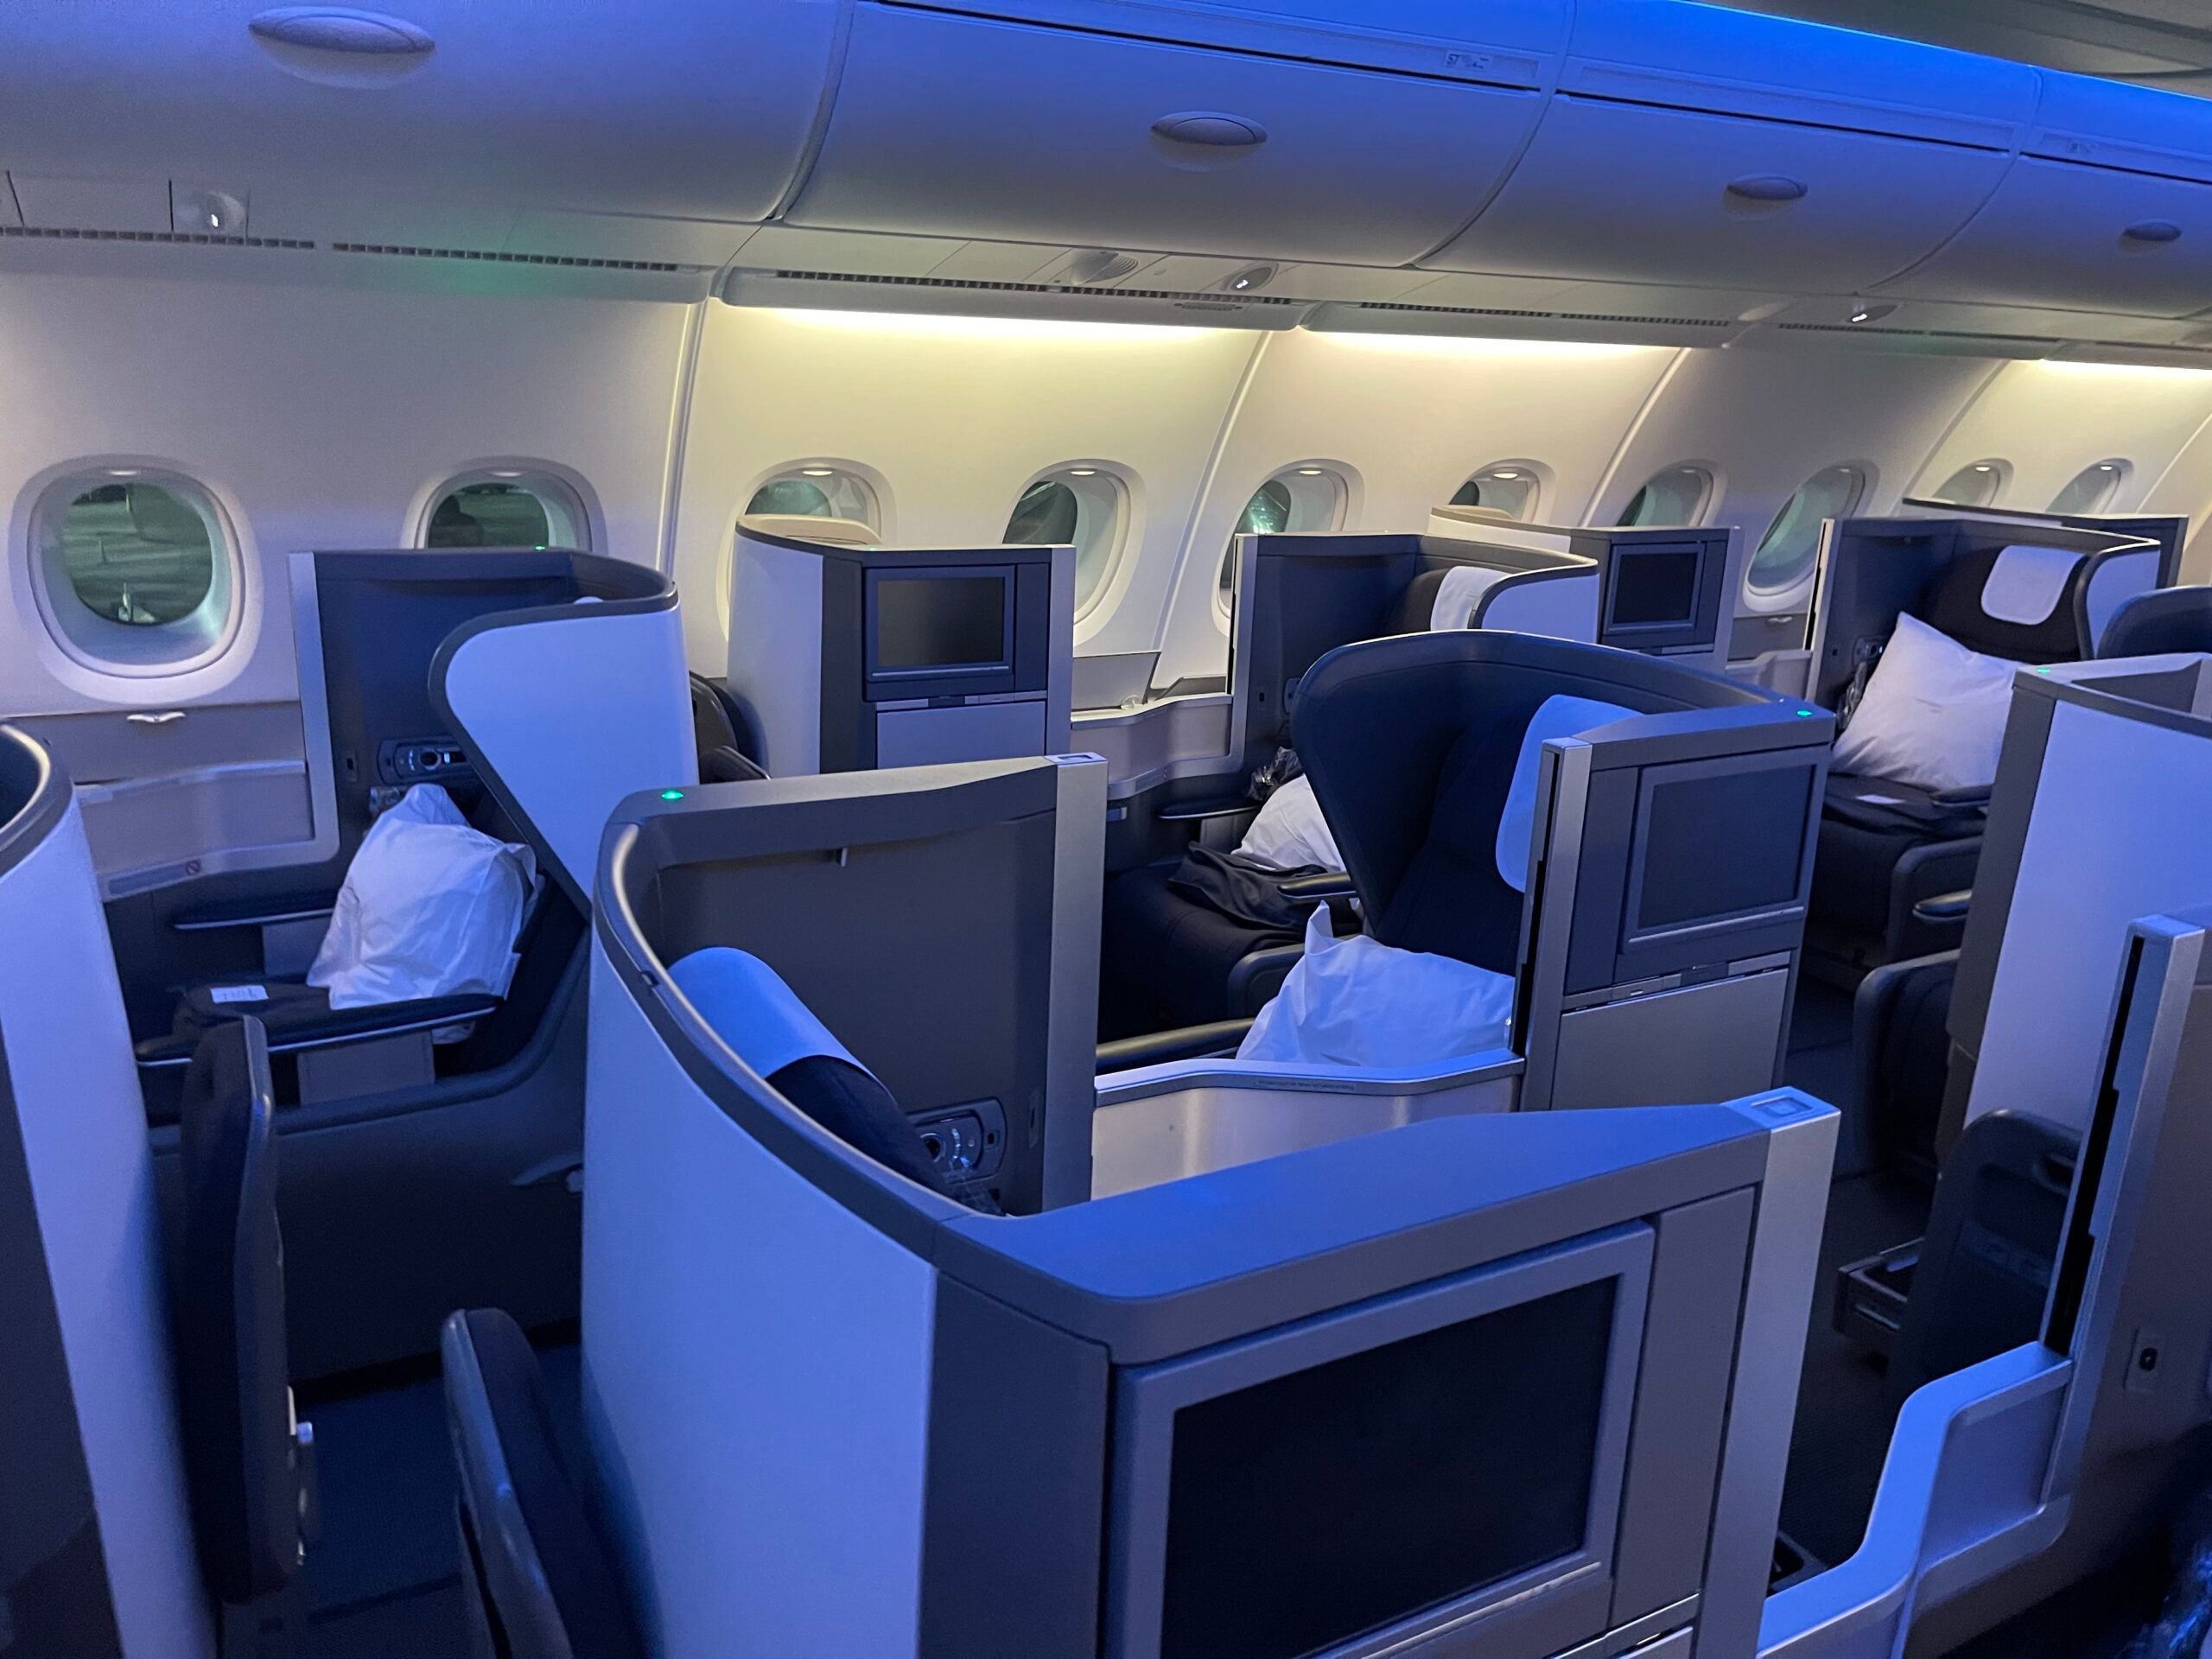 Book partner awards at fixed rates using AAdvantage miles - The Points Guy